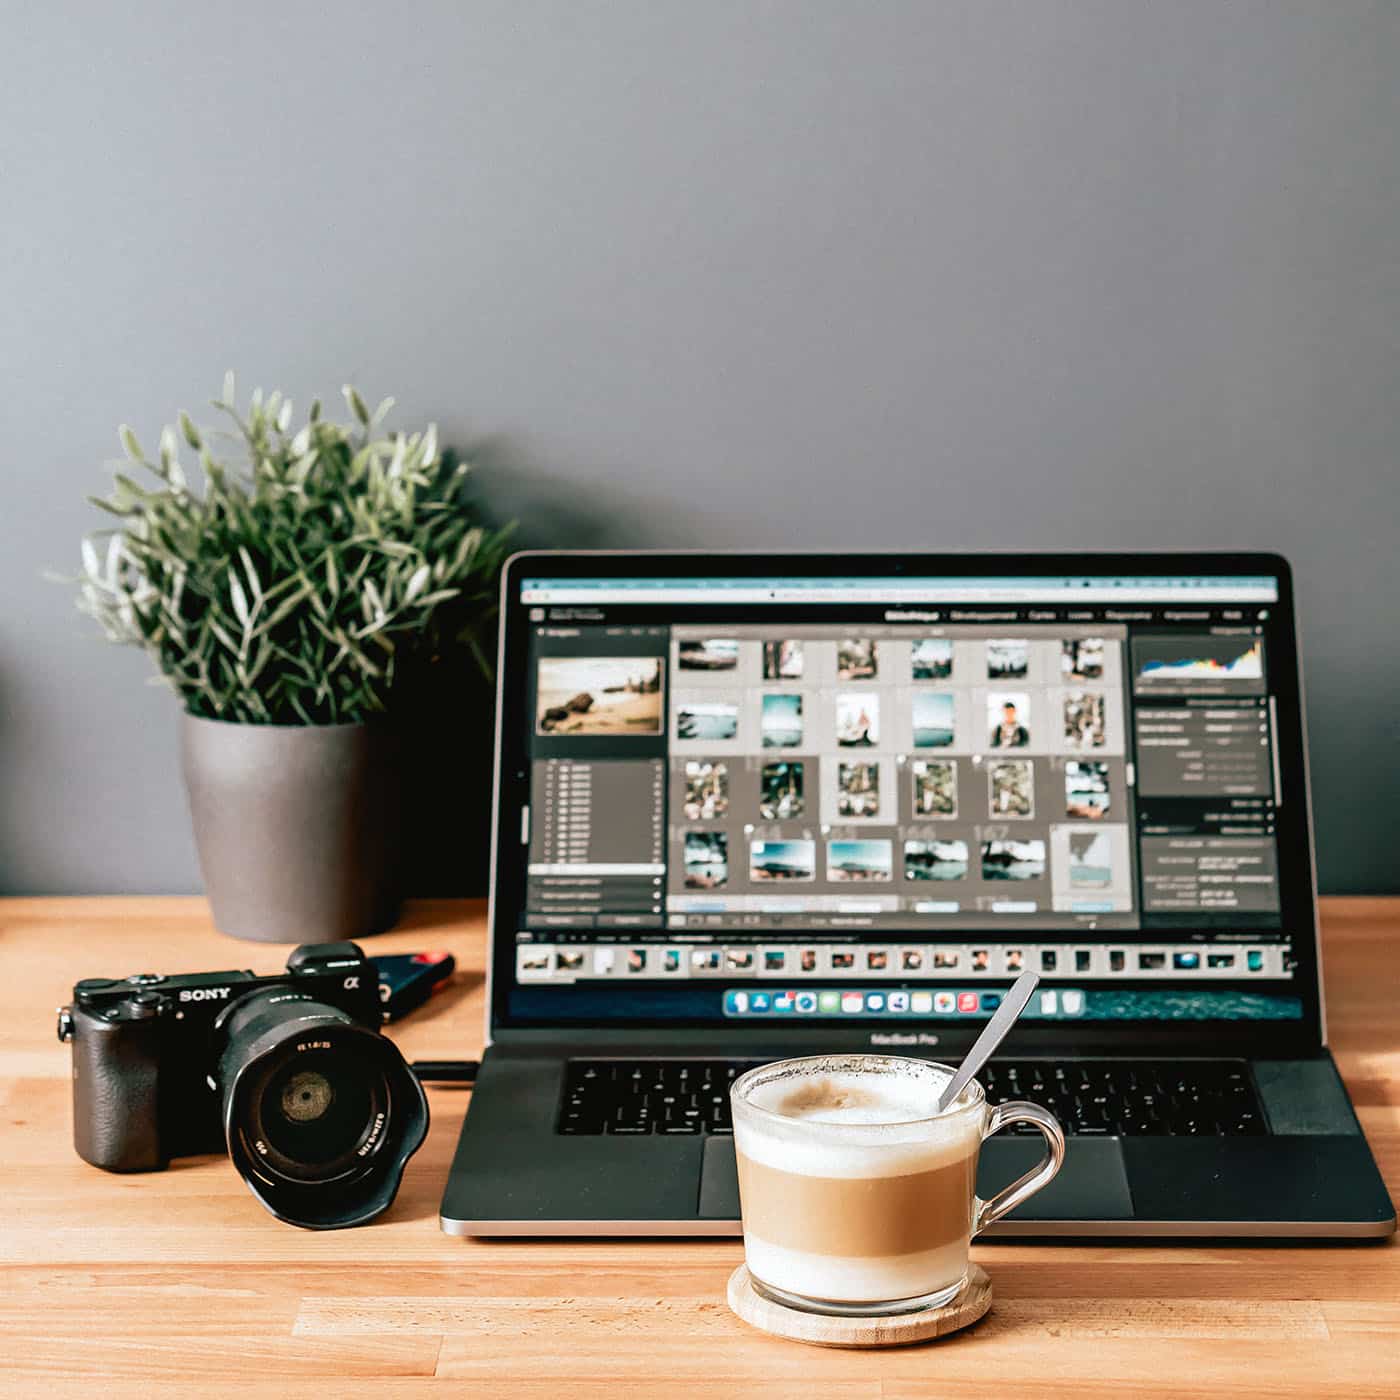 Professional photo editing workspace with a laptop displaying photo management software, a Sony camera, and a cup of coffee on a wooden desk.